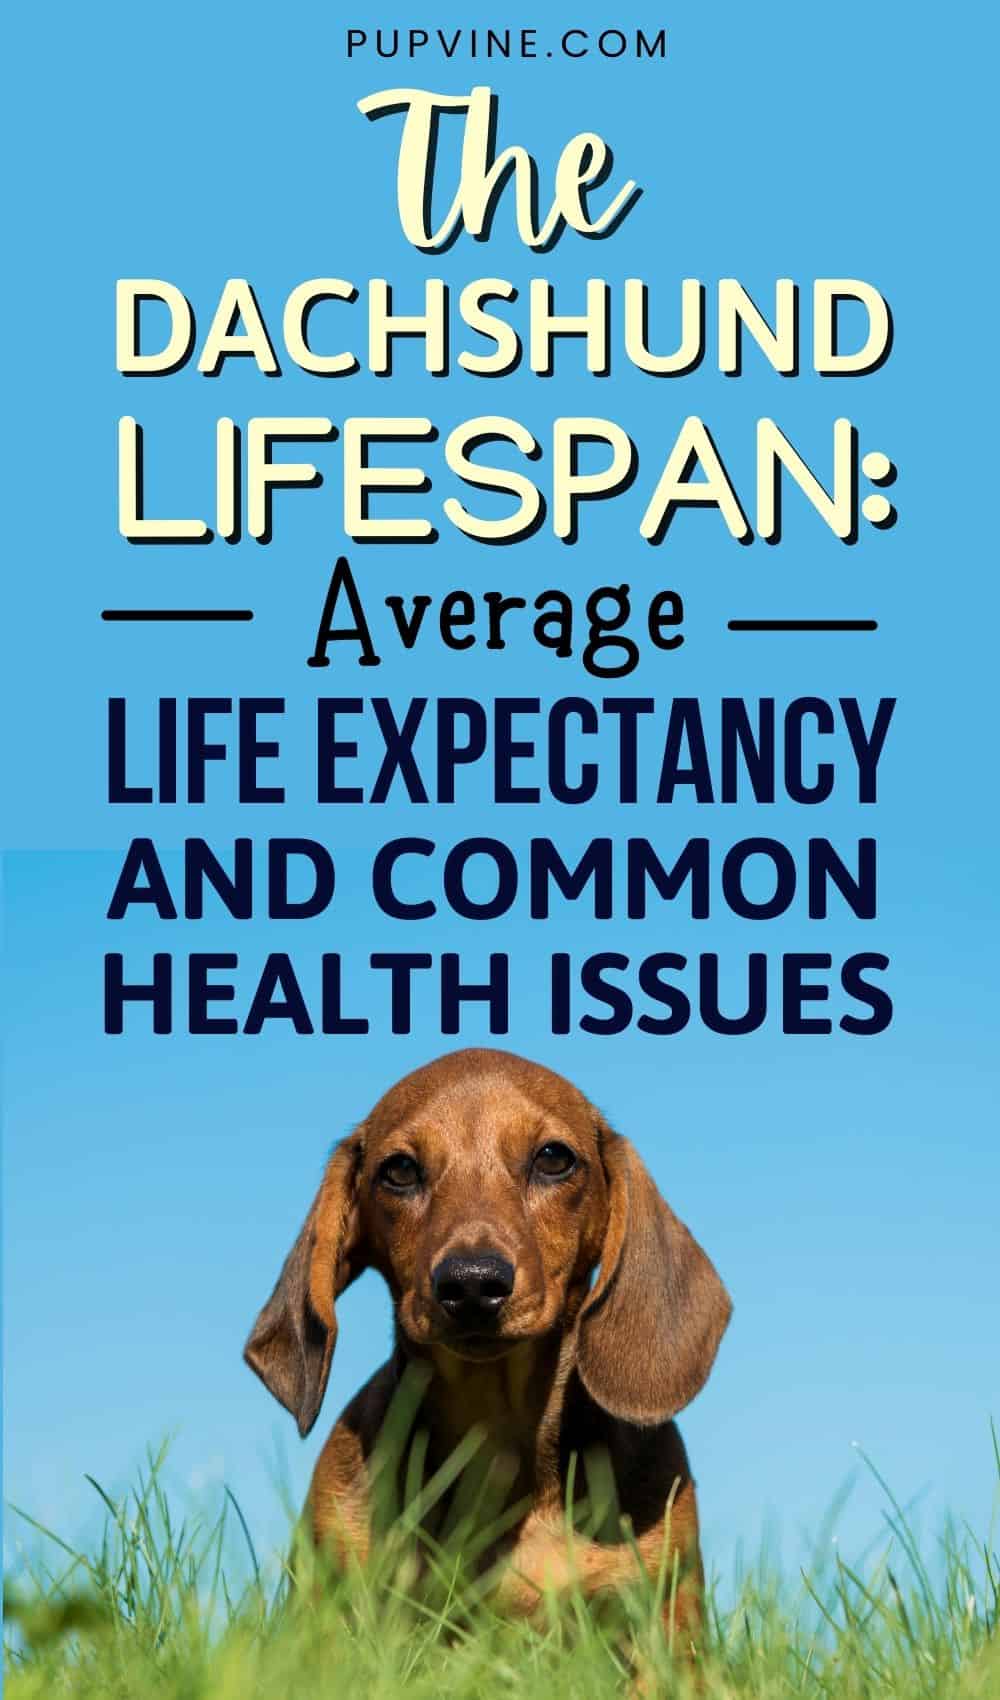 The Dachshund Lifespan Average Life Expectancy And Common Health Issues